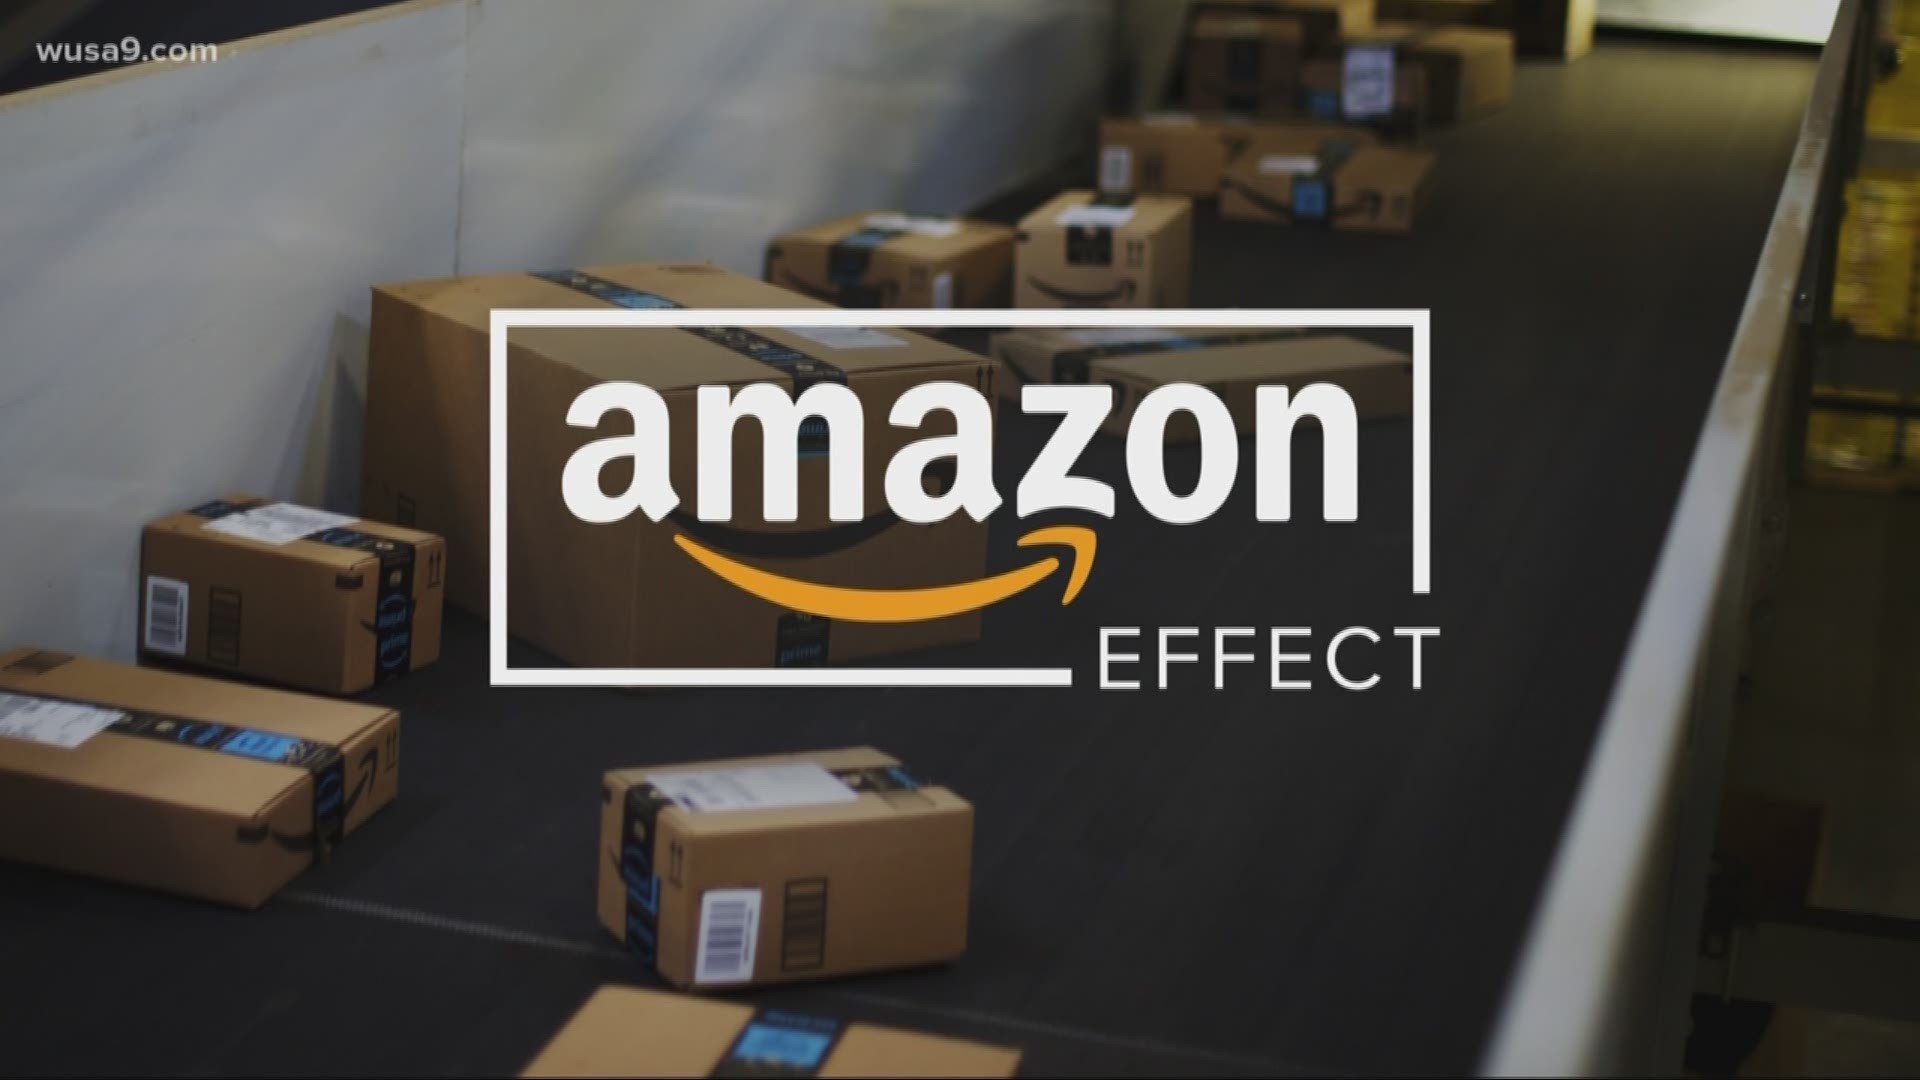 $150,000 estimate from company may be a bit misleading for HQ2 in Arlington. All this week online and at 11, we're digging into the Amazon Effect.